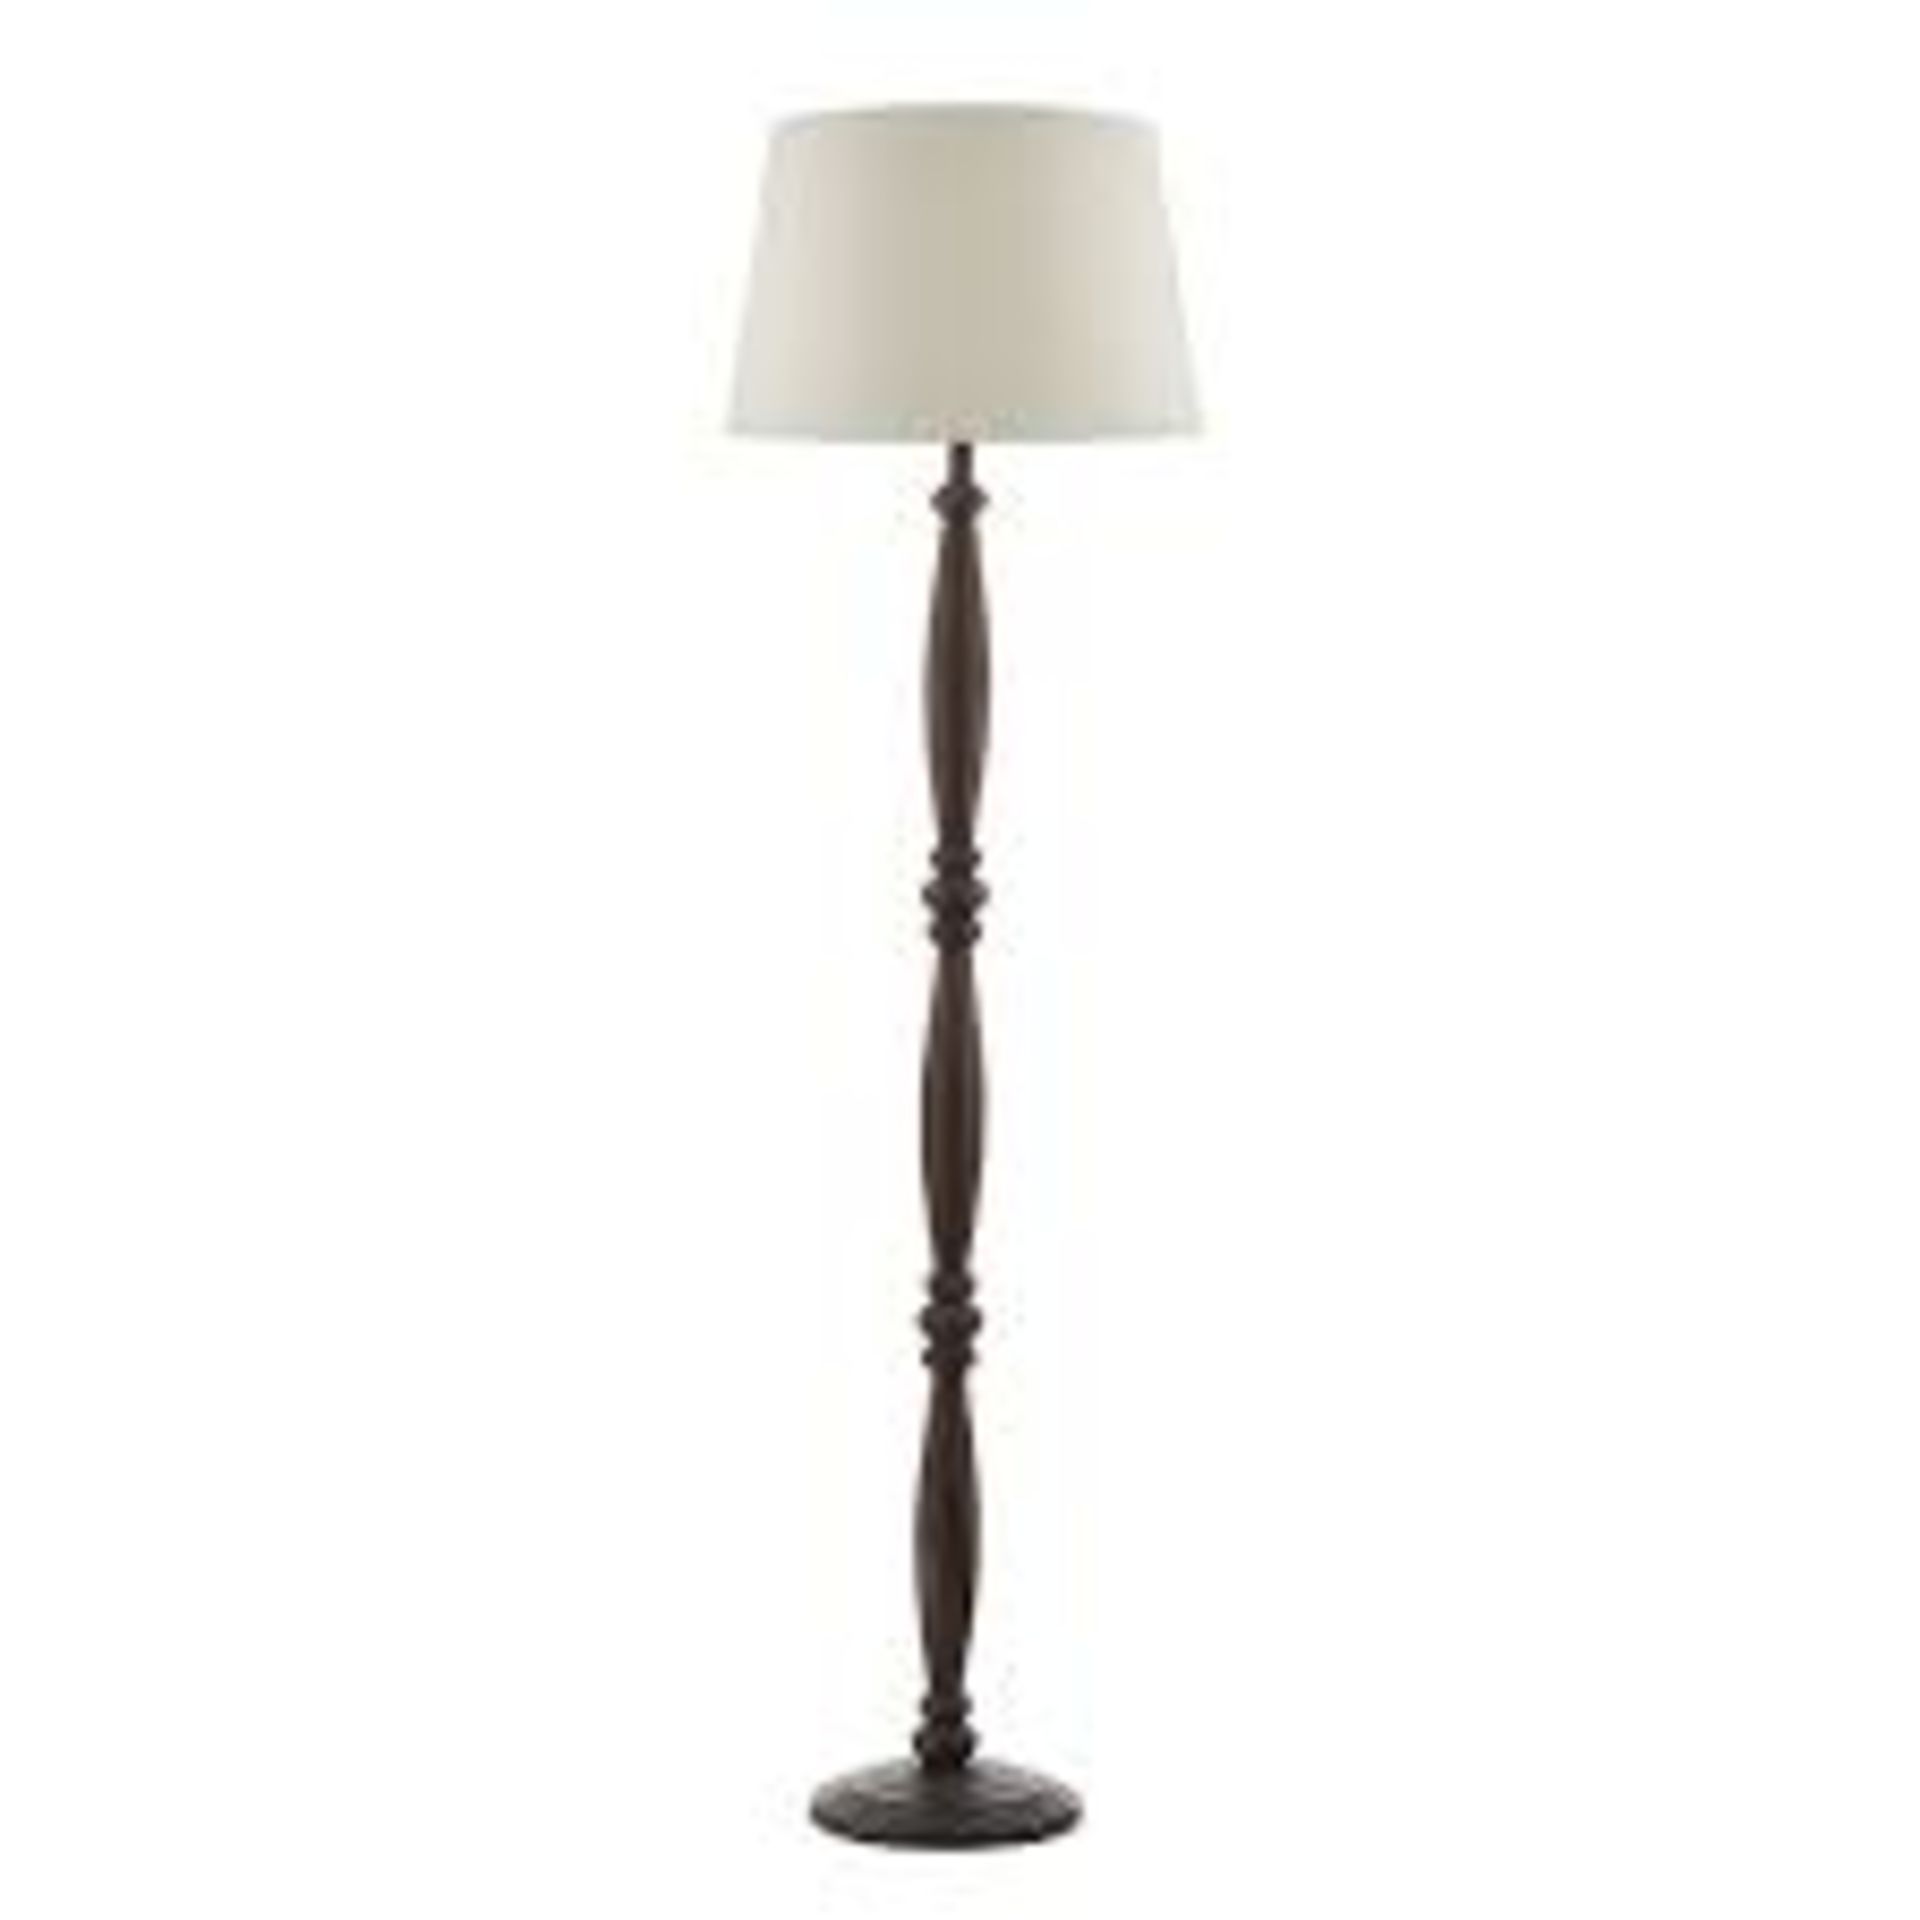 Boxed Dar Lighting Heywood 1 Light Floor Standing Lamp (Base Only) RRP £85 (16350) (Public Viewing